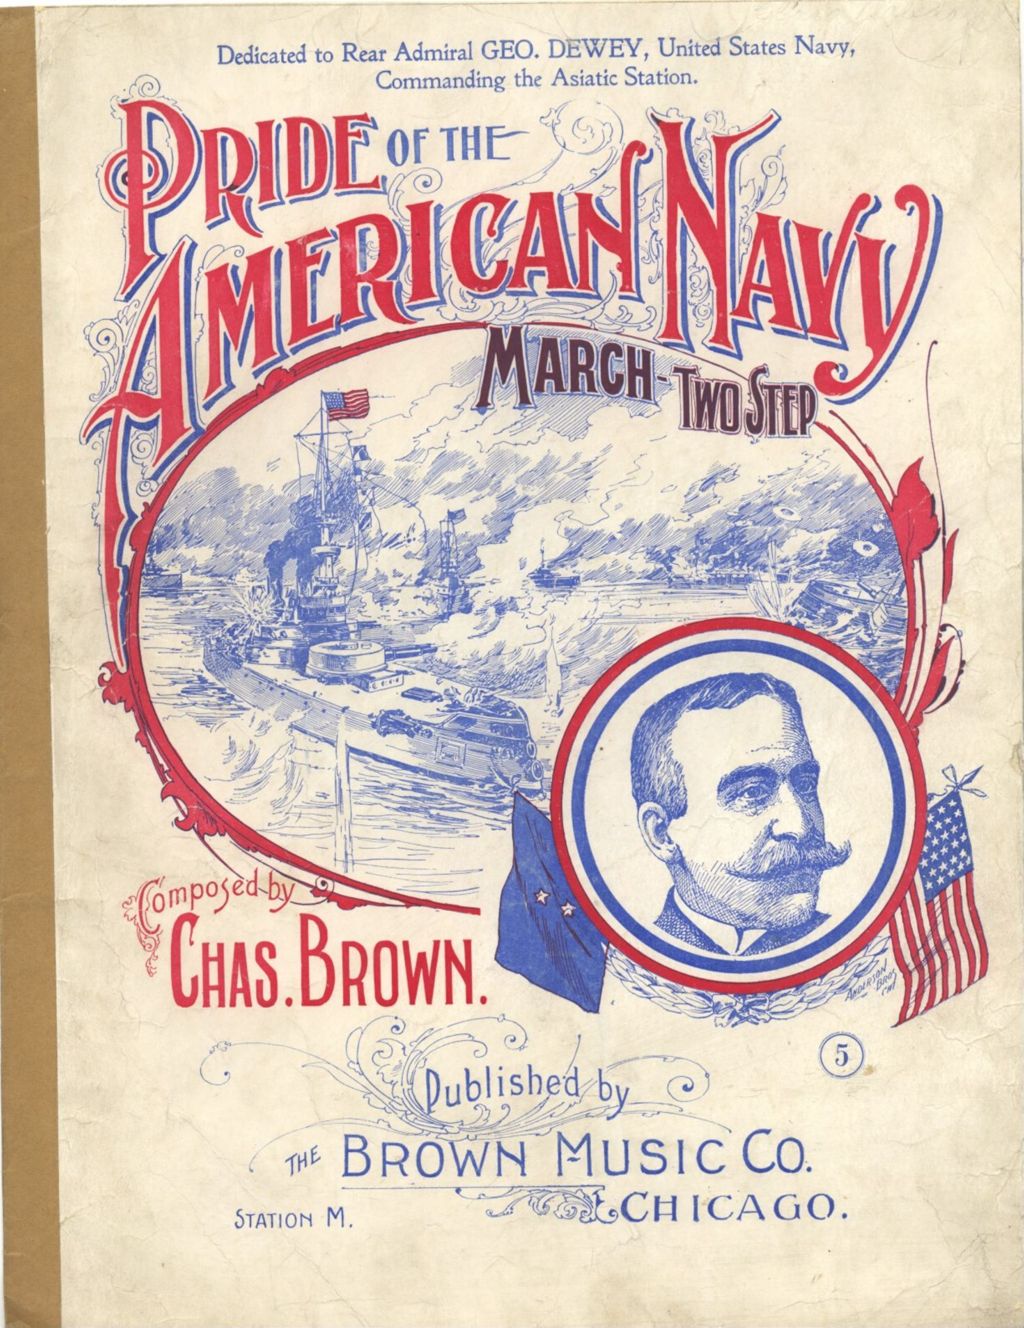 Miniature of Pride of the American Navy (March-Two-Step)